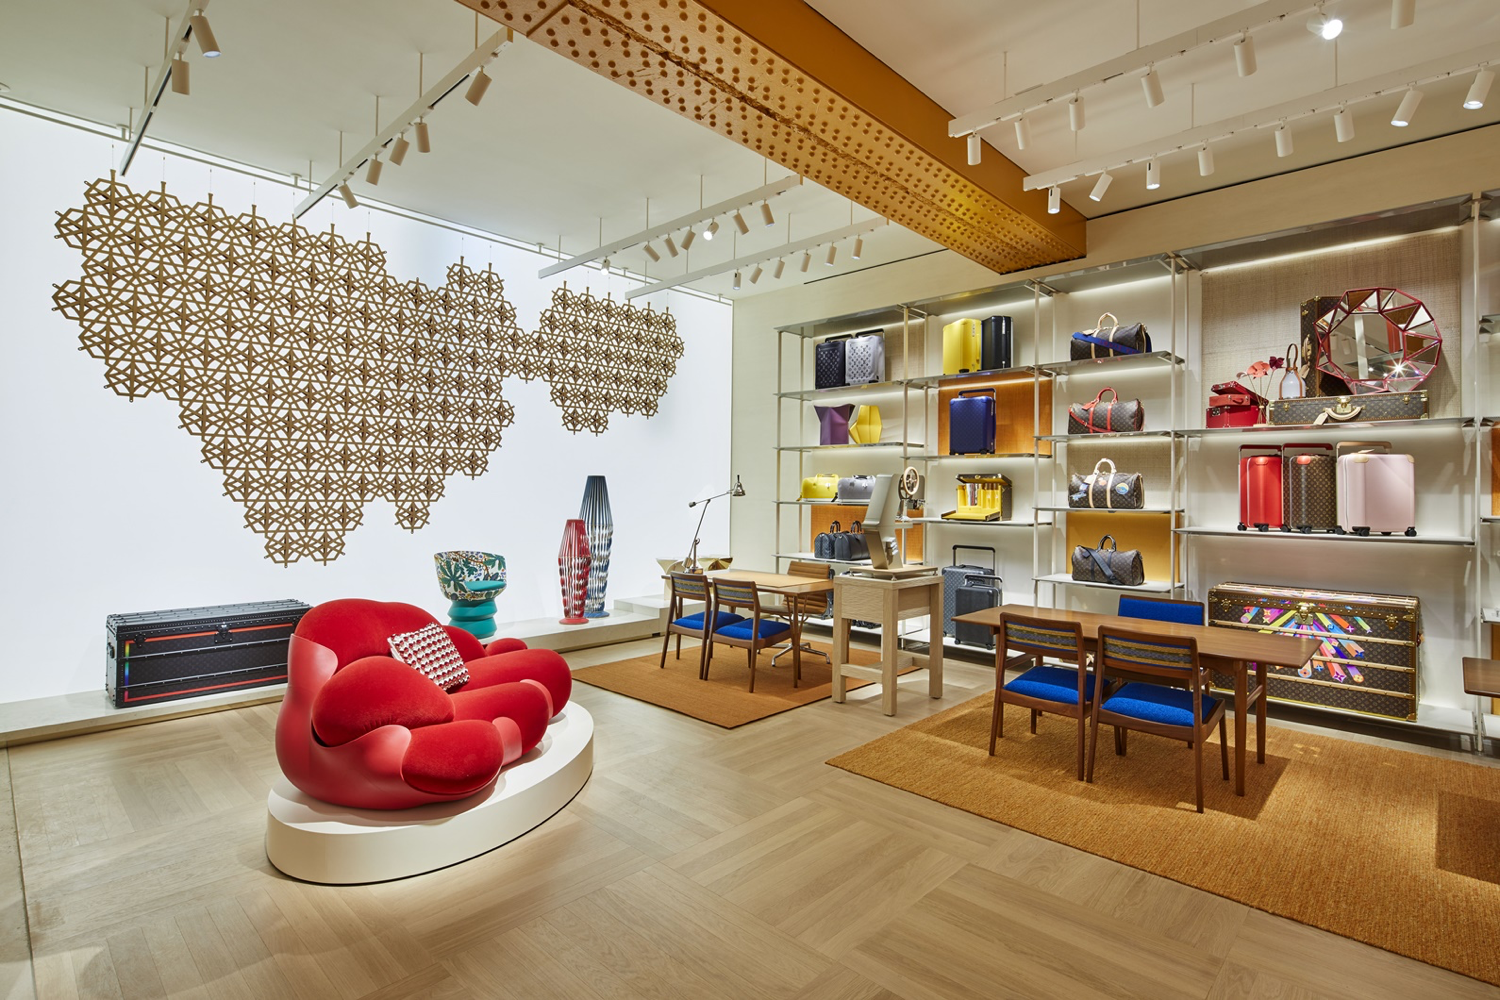 Louis Vuitton reopens its London store in the middle of a colour explosion  – Mess Magazine